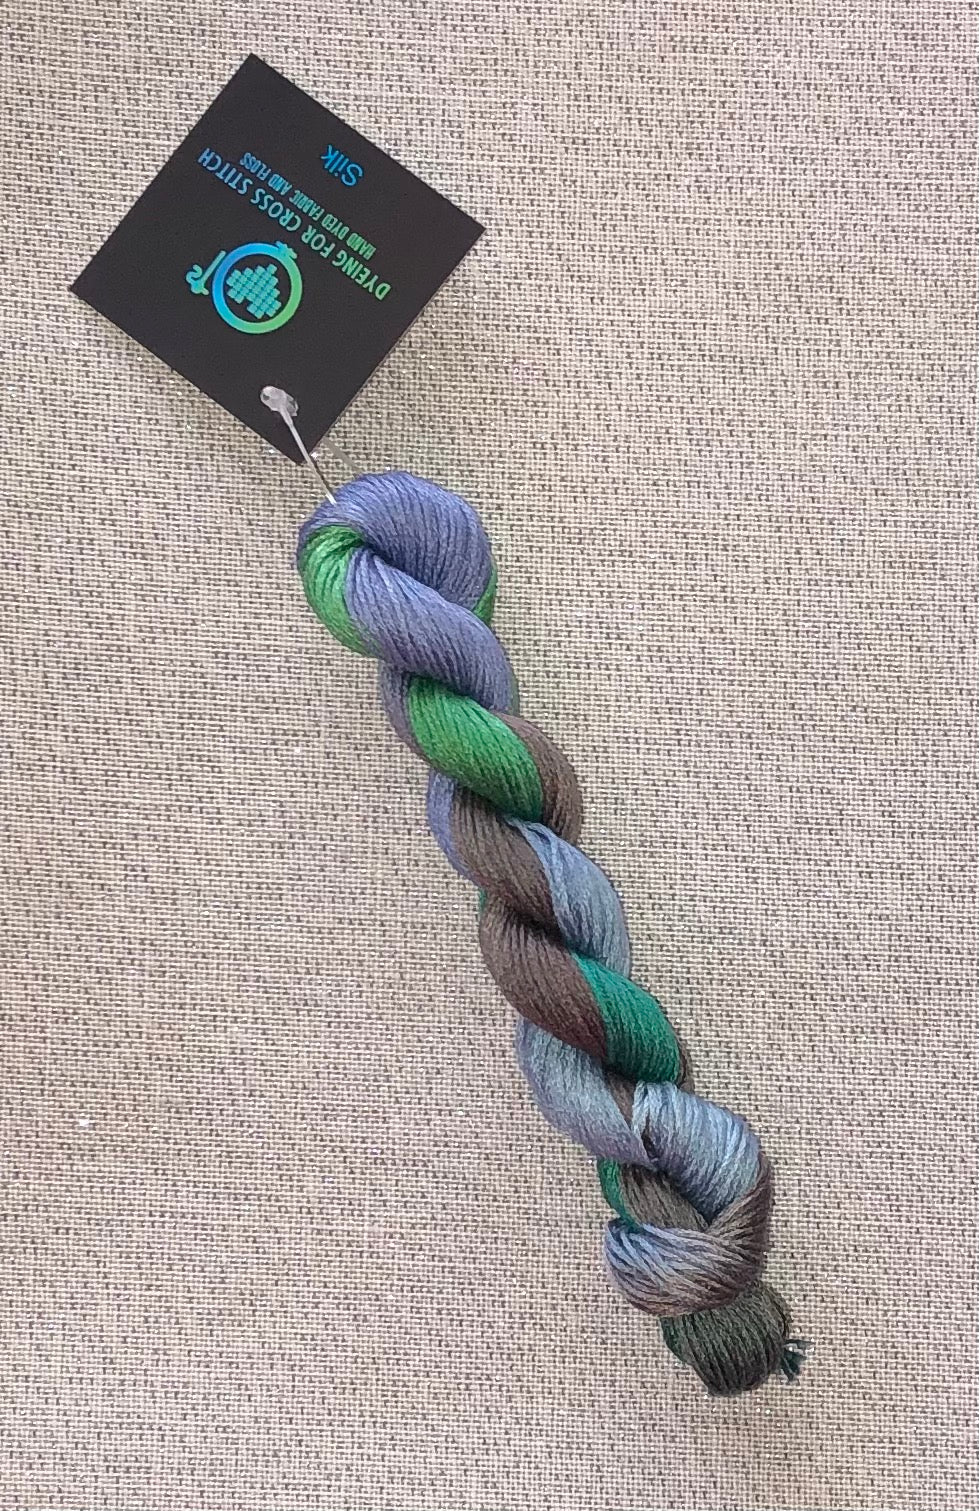 Silk hand dyed floss - Antique Peacock - Dyeing for Cross Stitch